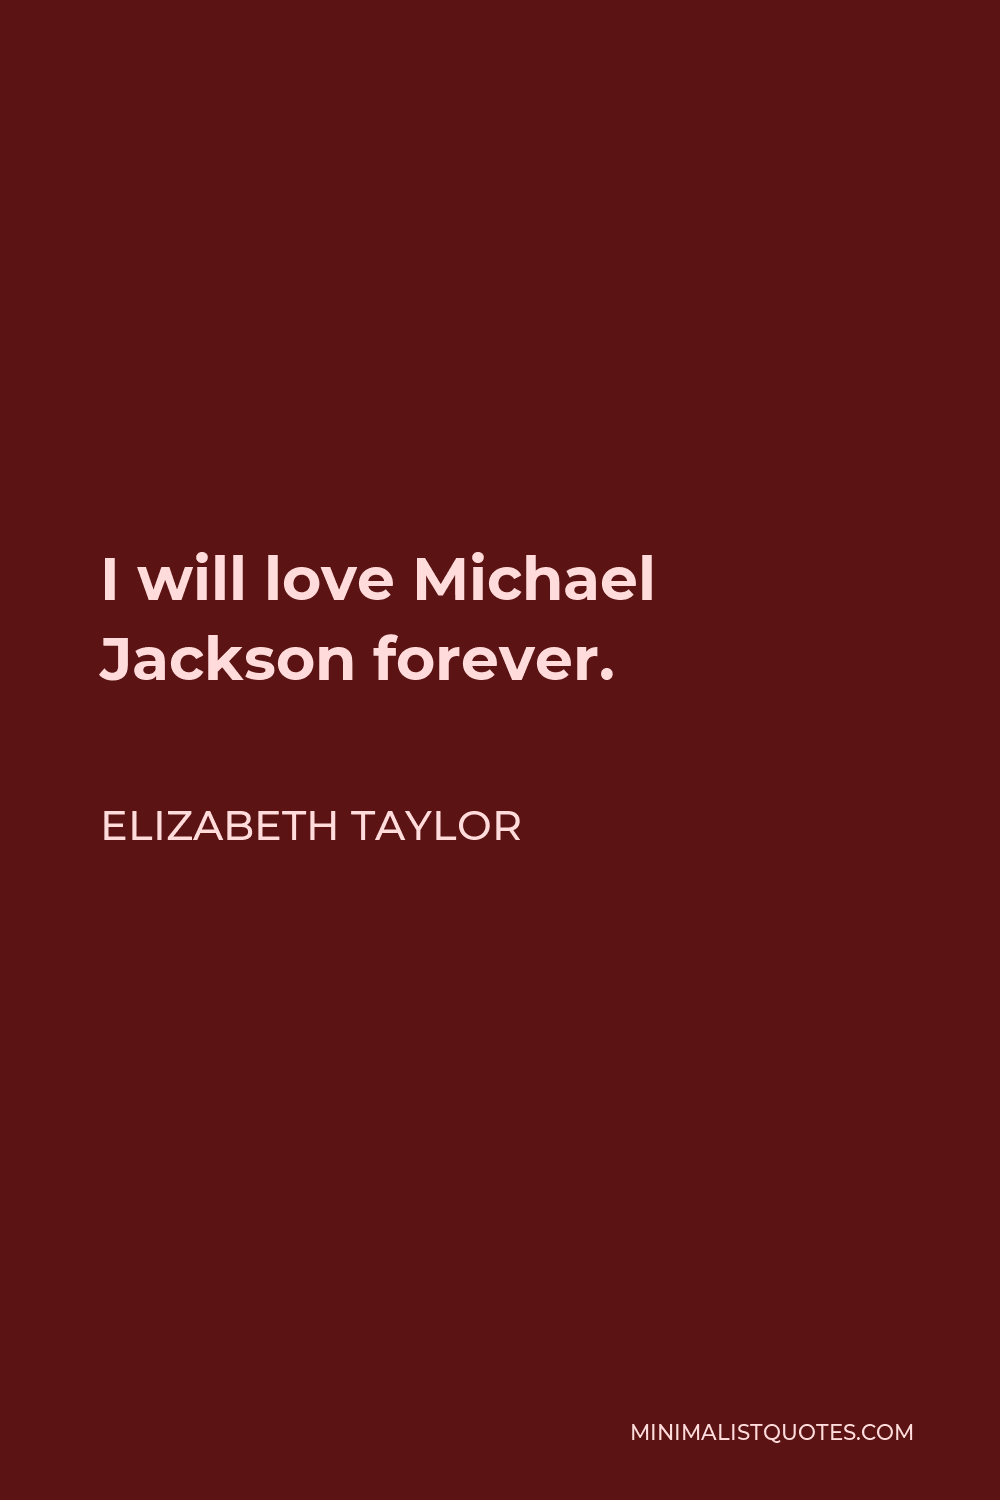 Elizabeth Taylor Quote - I will love Michael Jackson forever.